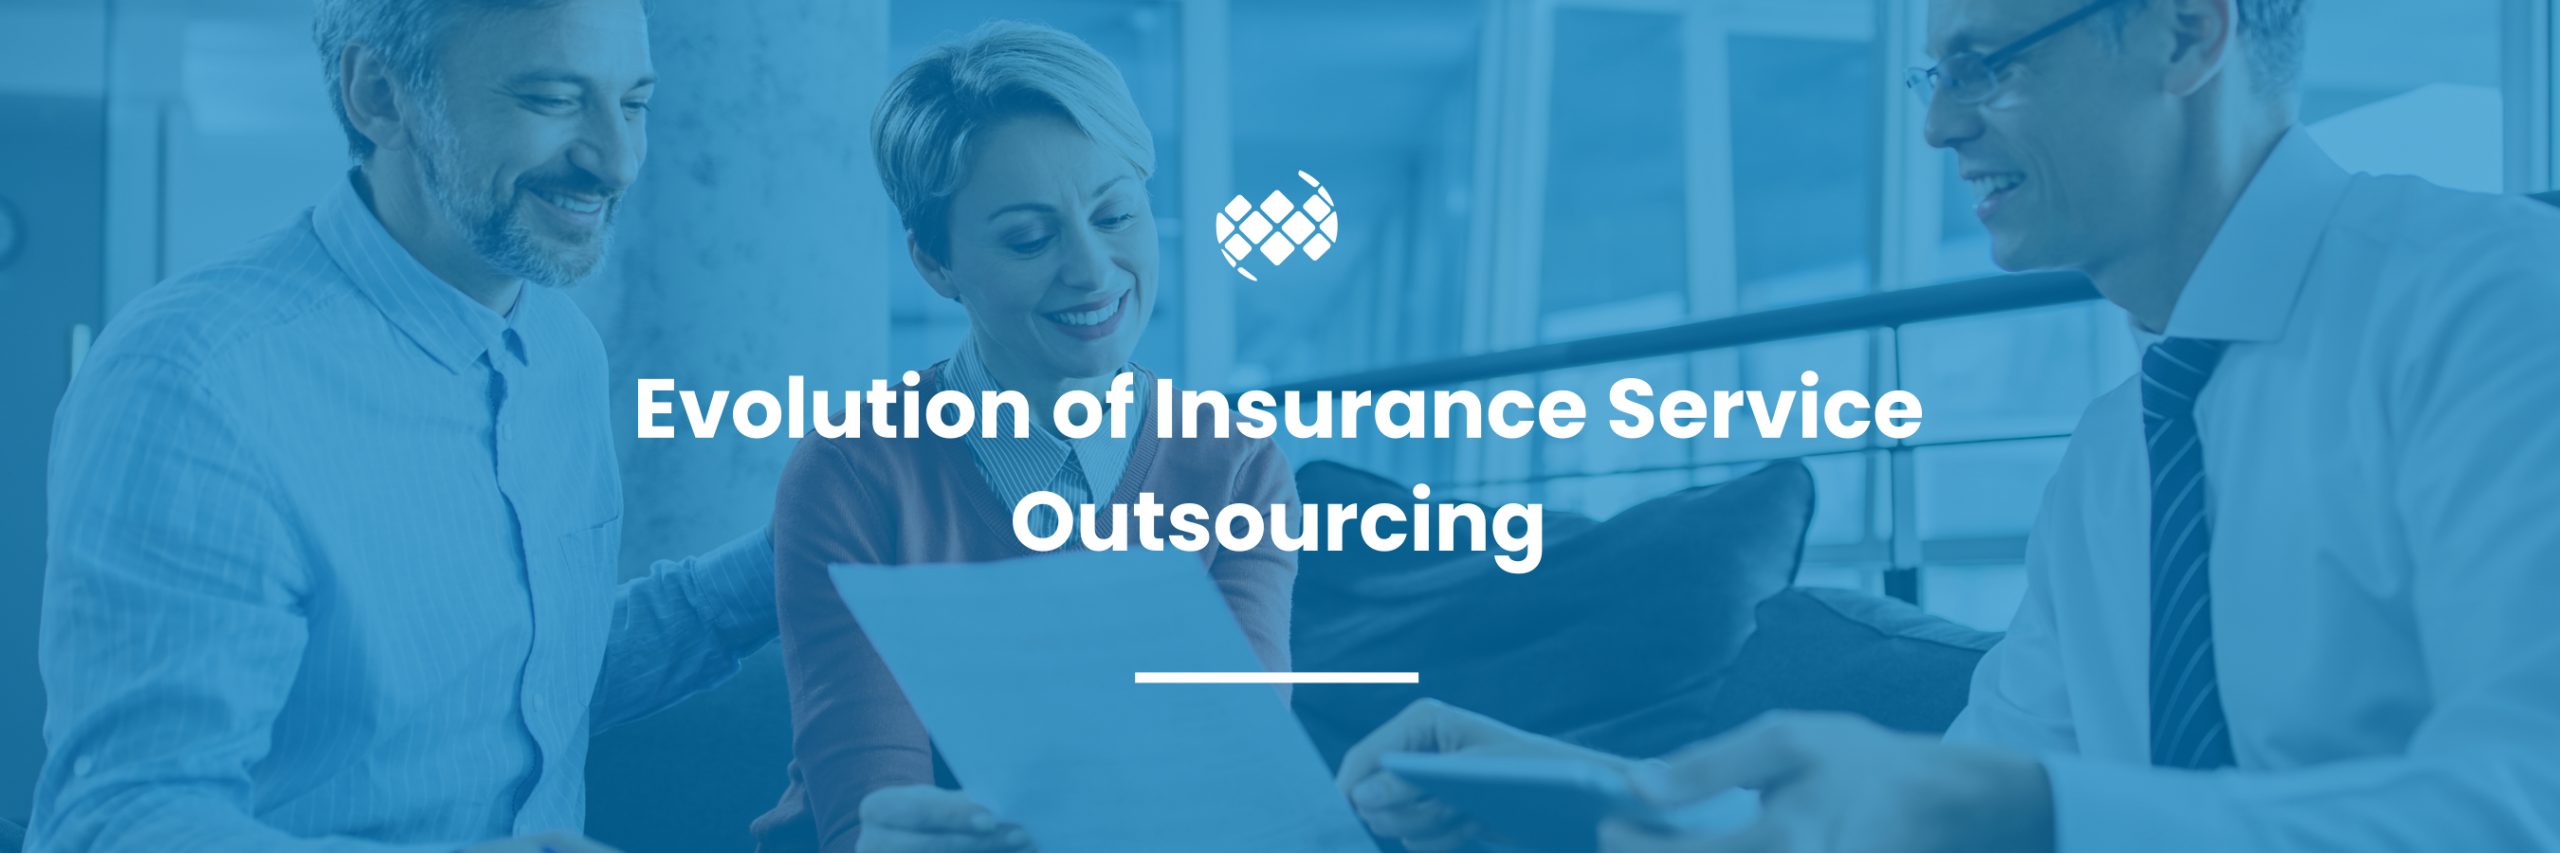 Insurance service outsourcing